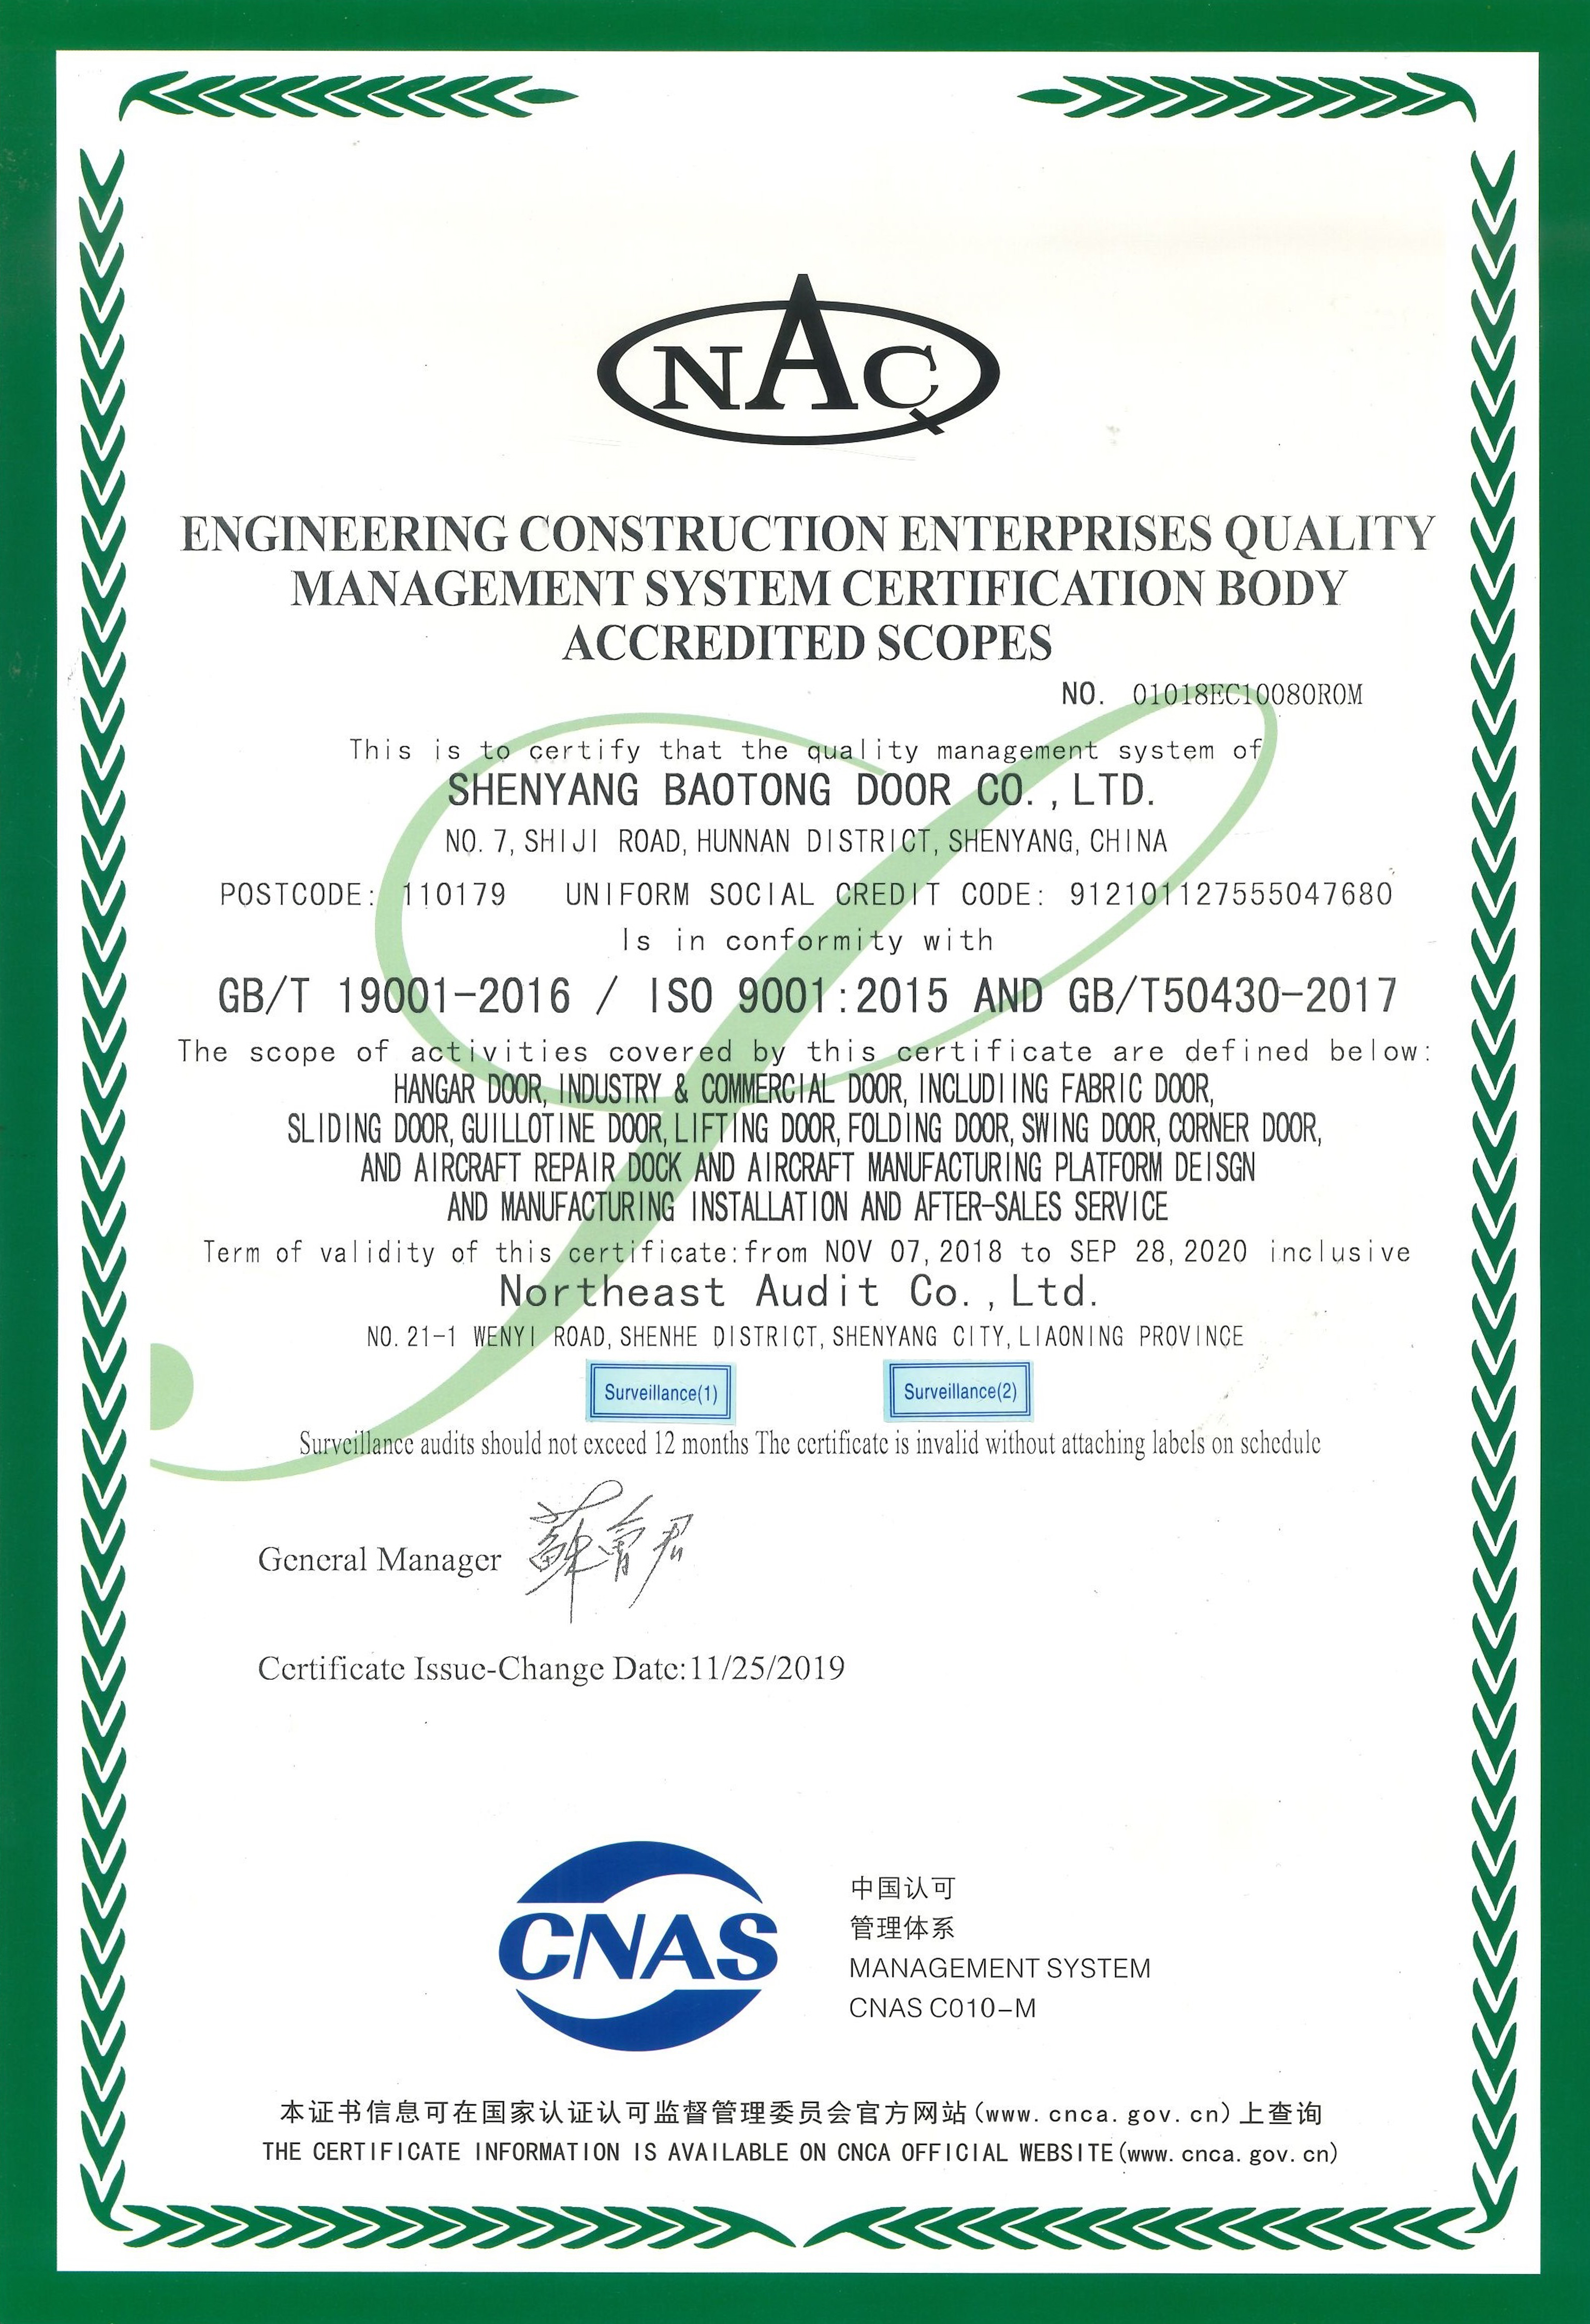 Certificate of Quality Management System for Engineering Construction Enterprises (English)